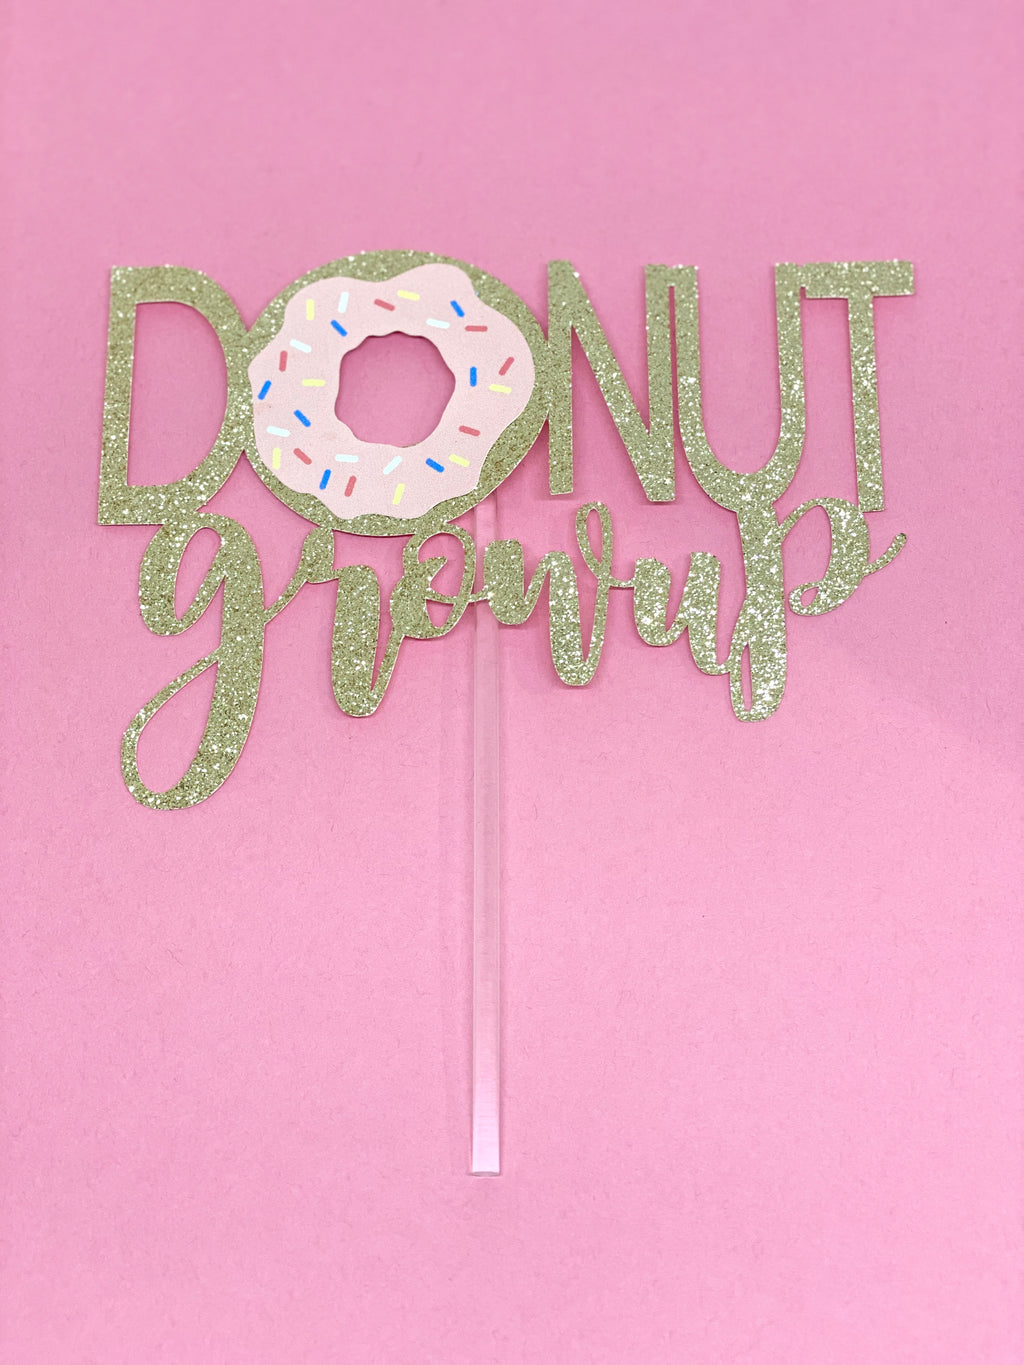 DONUT grow up Cake Topper